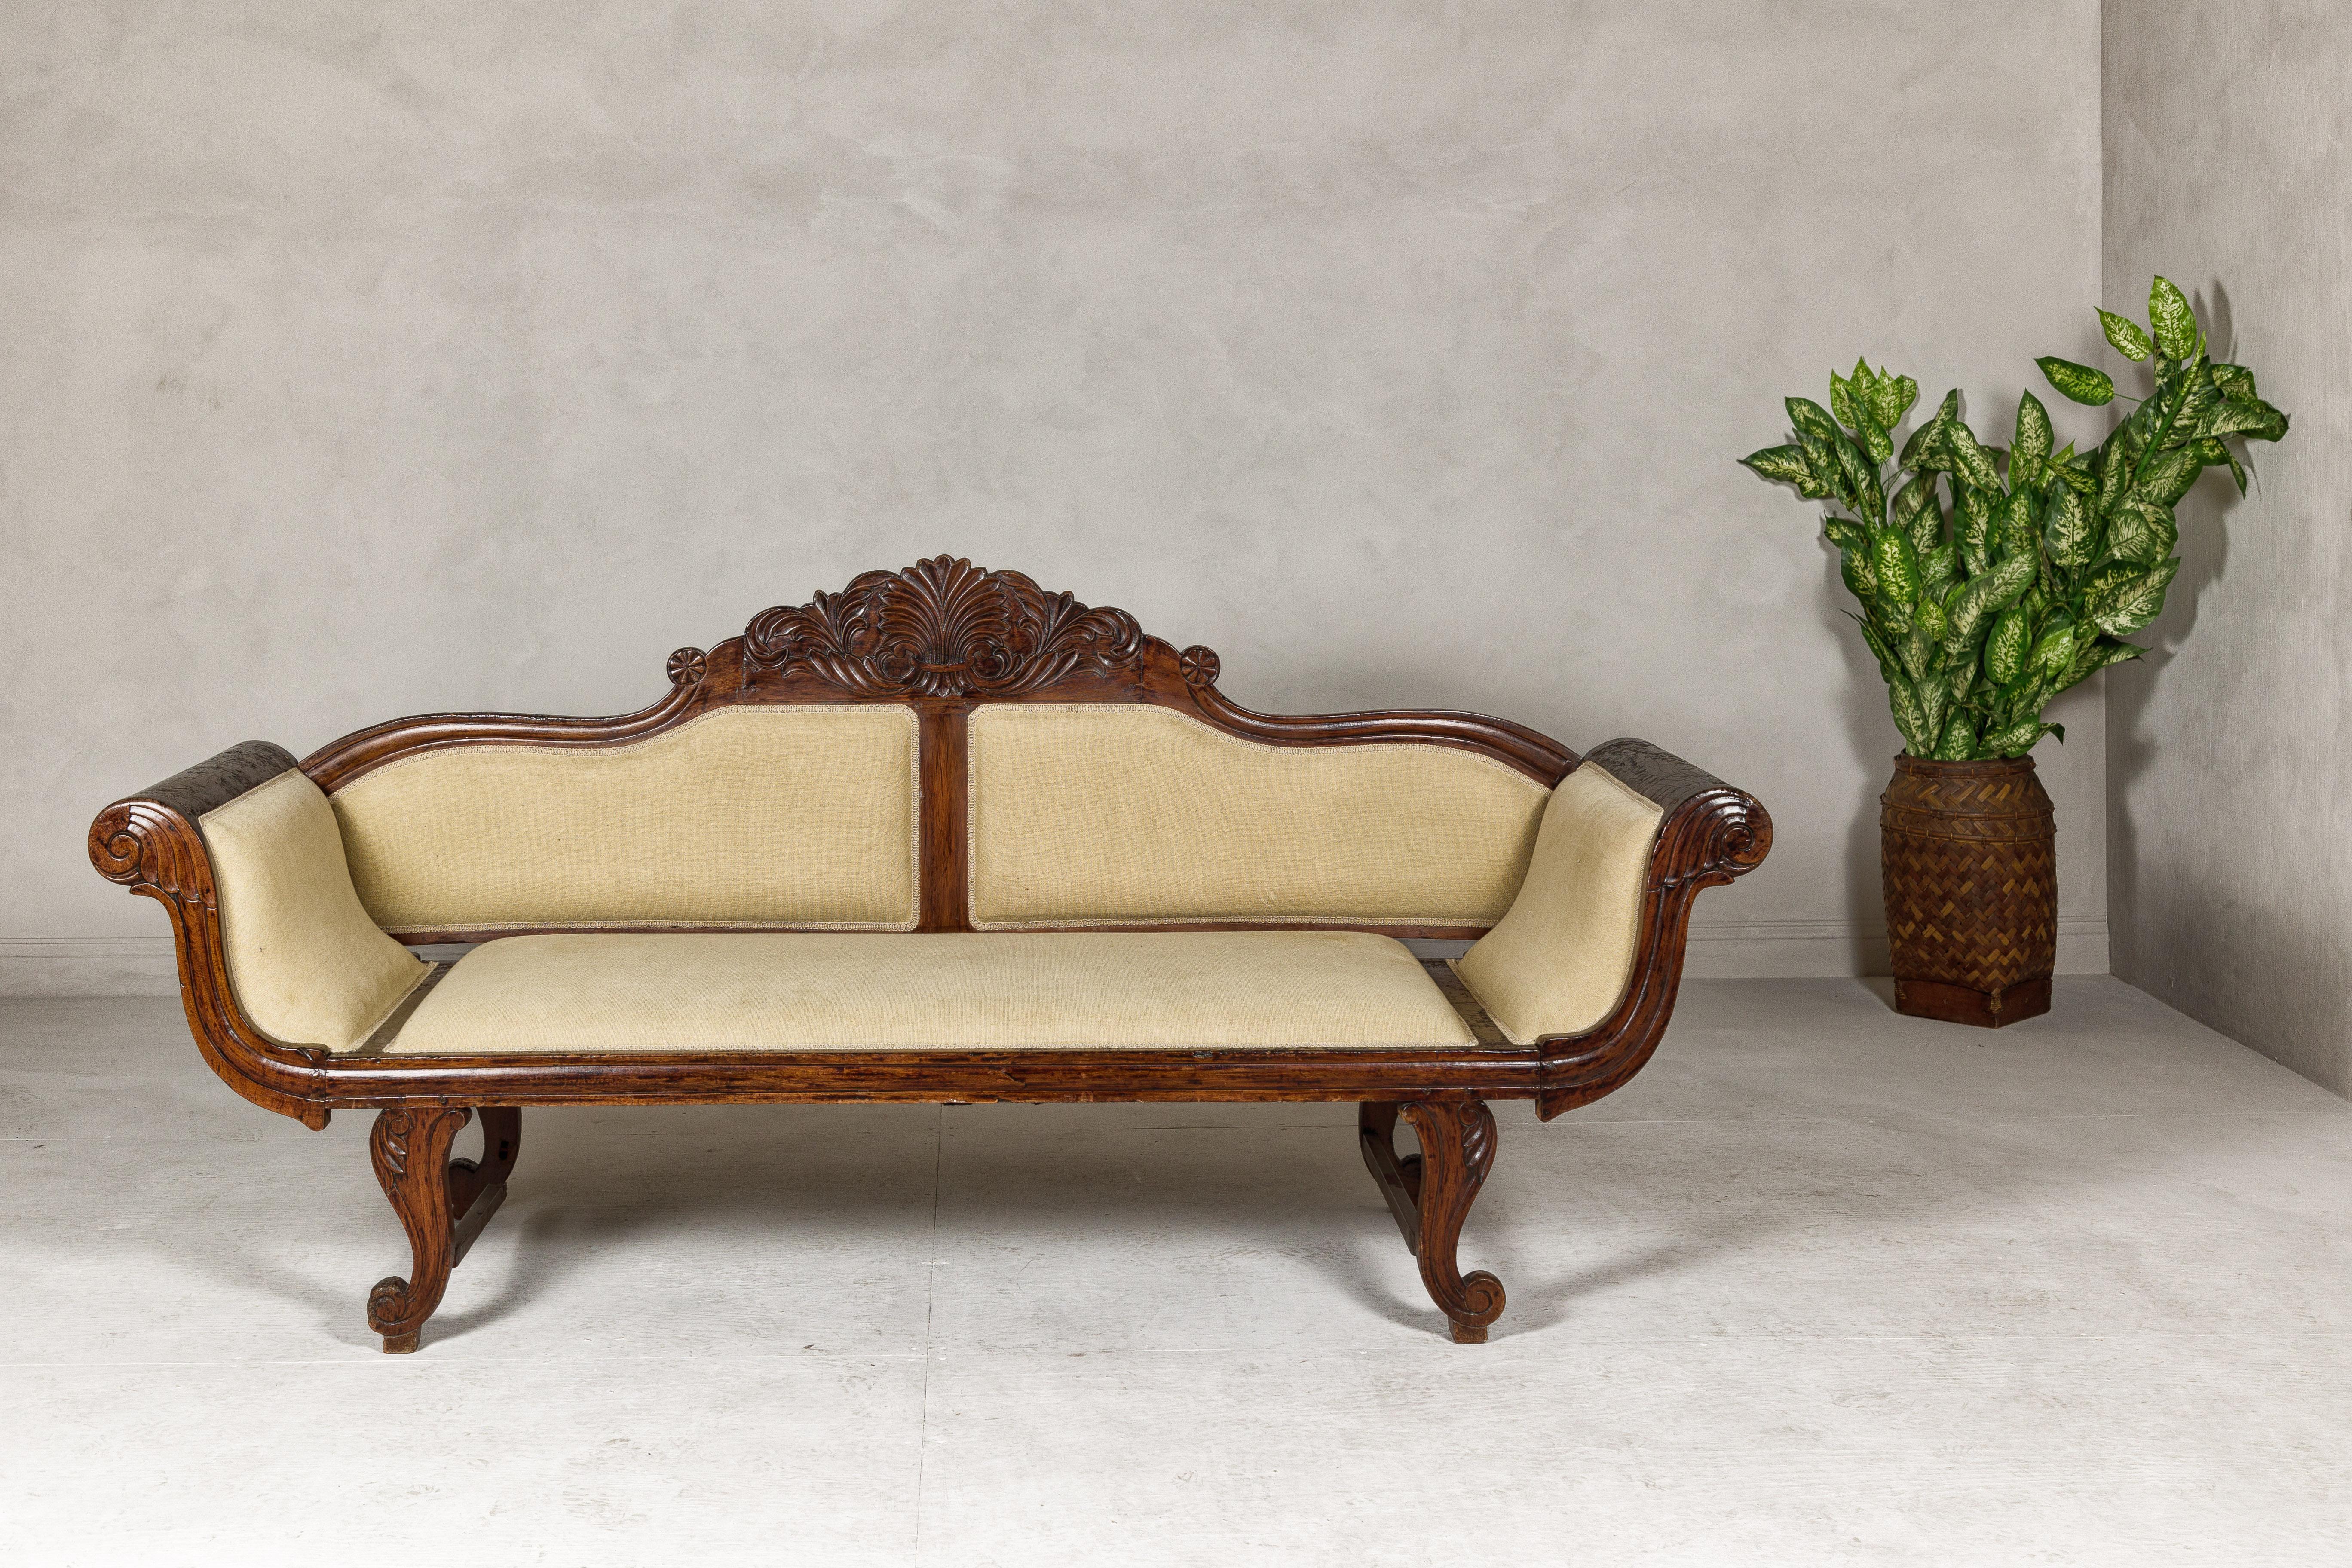 Asian Dutch Colonial Wooden Settee with Carved Crest and Out-Scrolling Arms For Sale